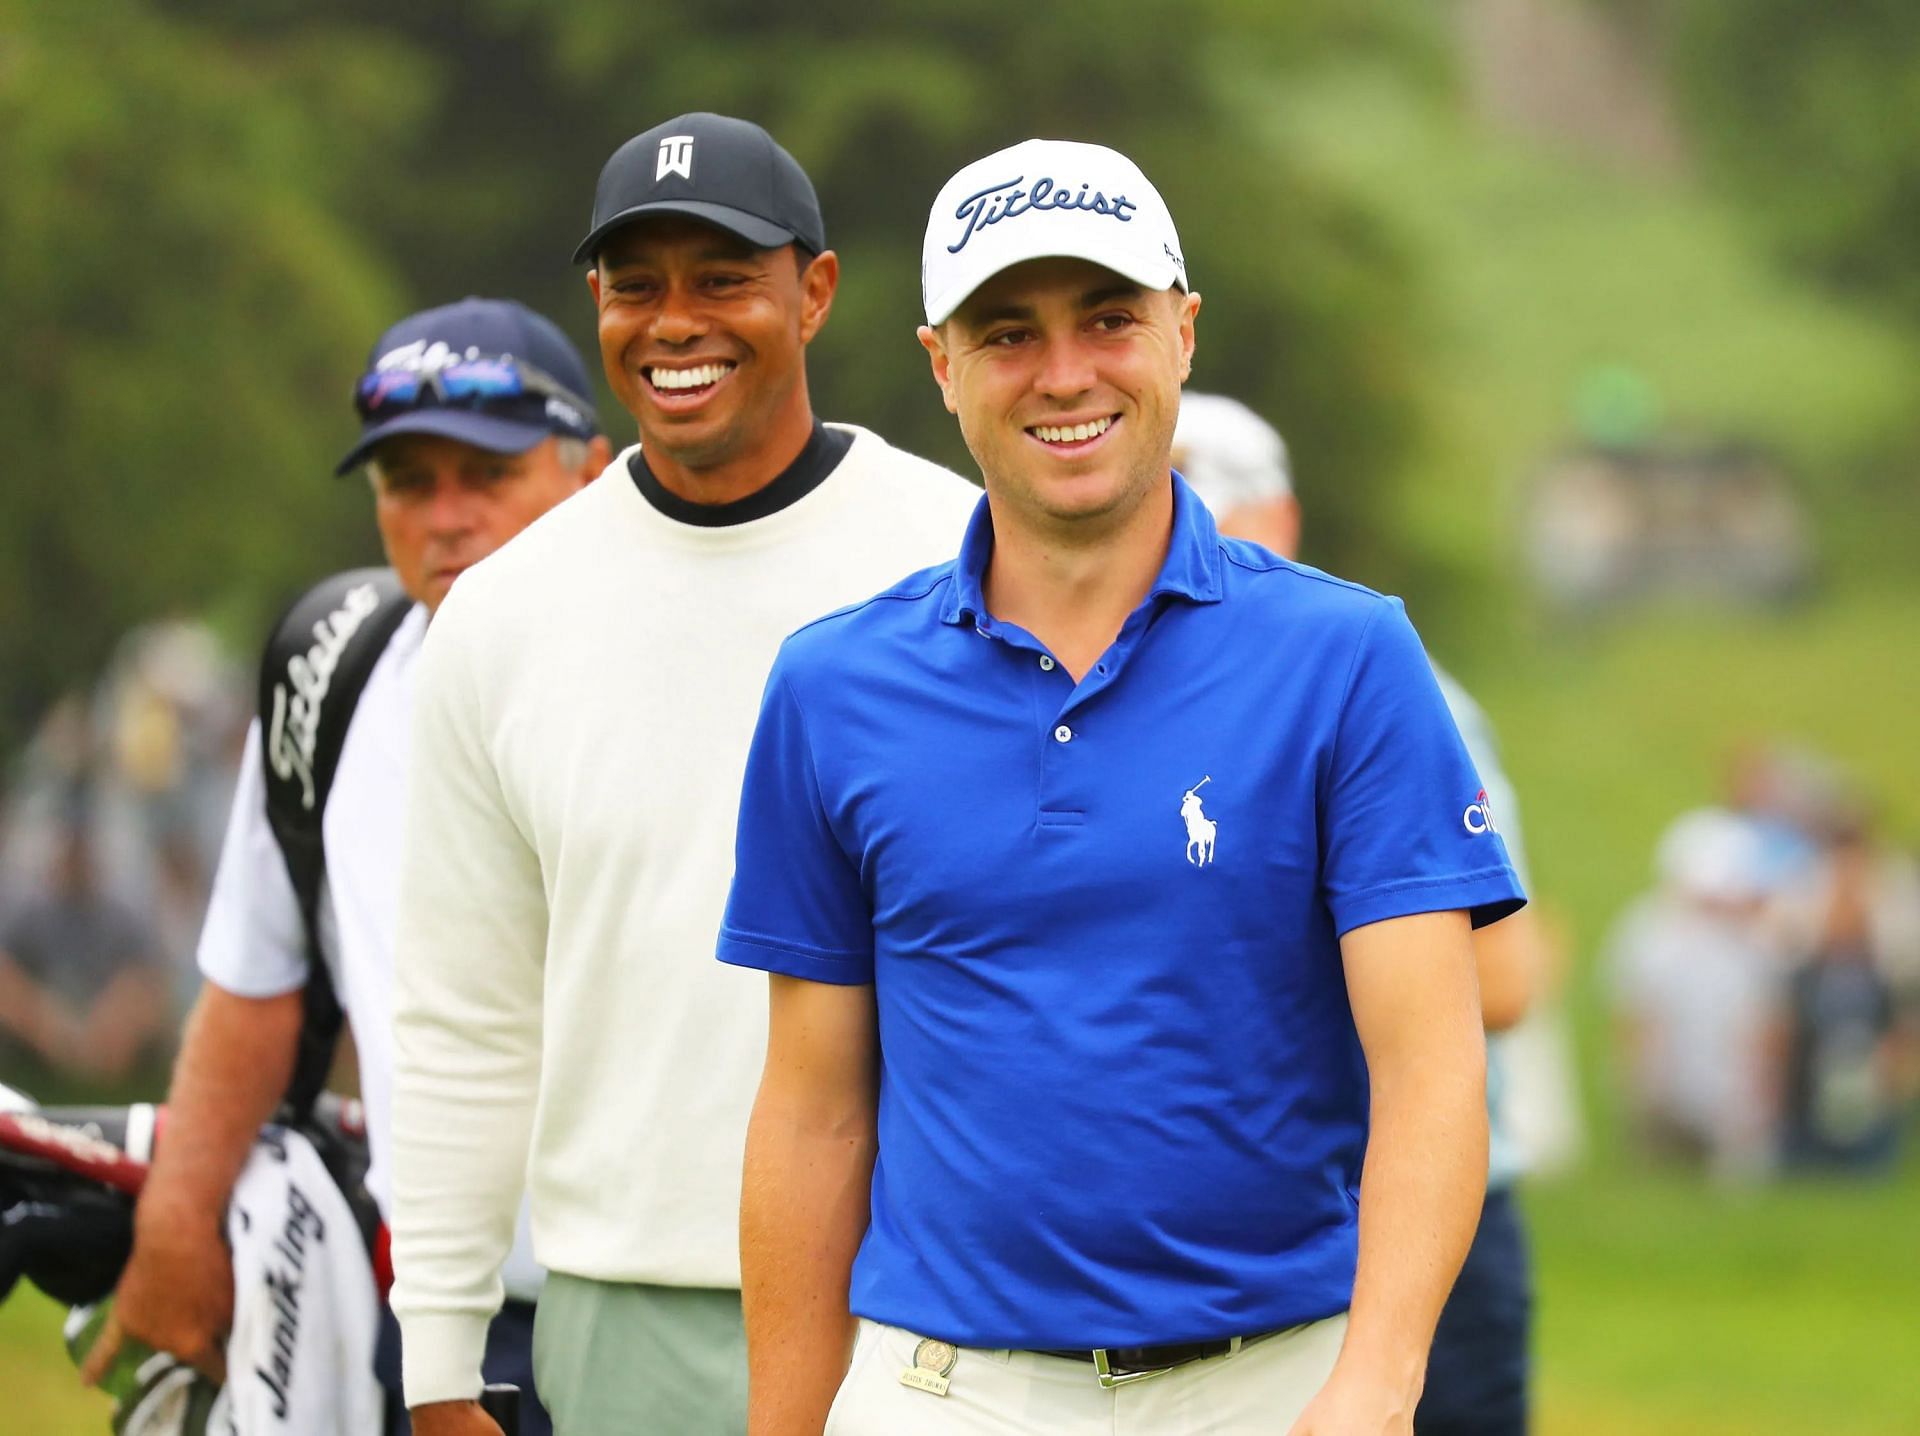 As per Woods, Justin Thomas is like his younger brother